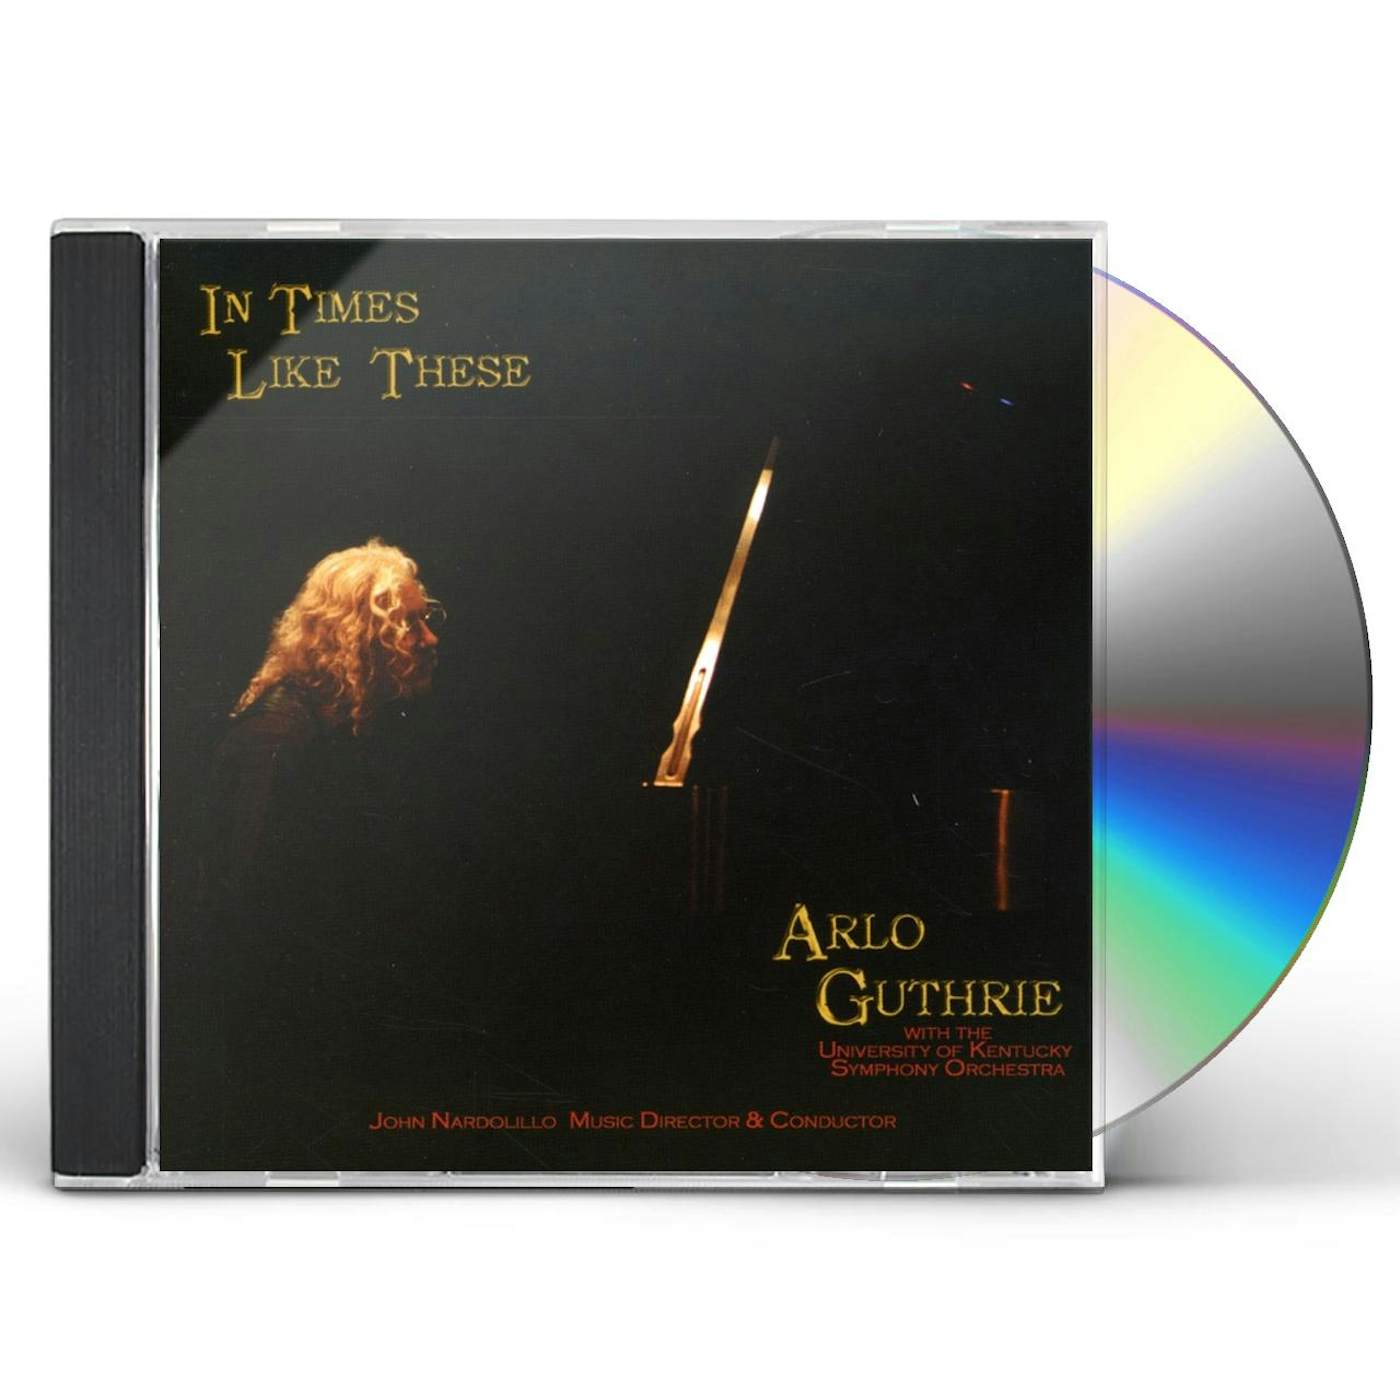 Arlo Guthrie IN TIMES LIKE THESE CD